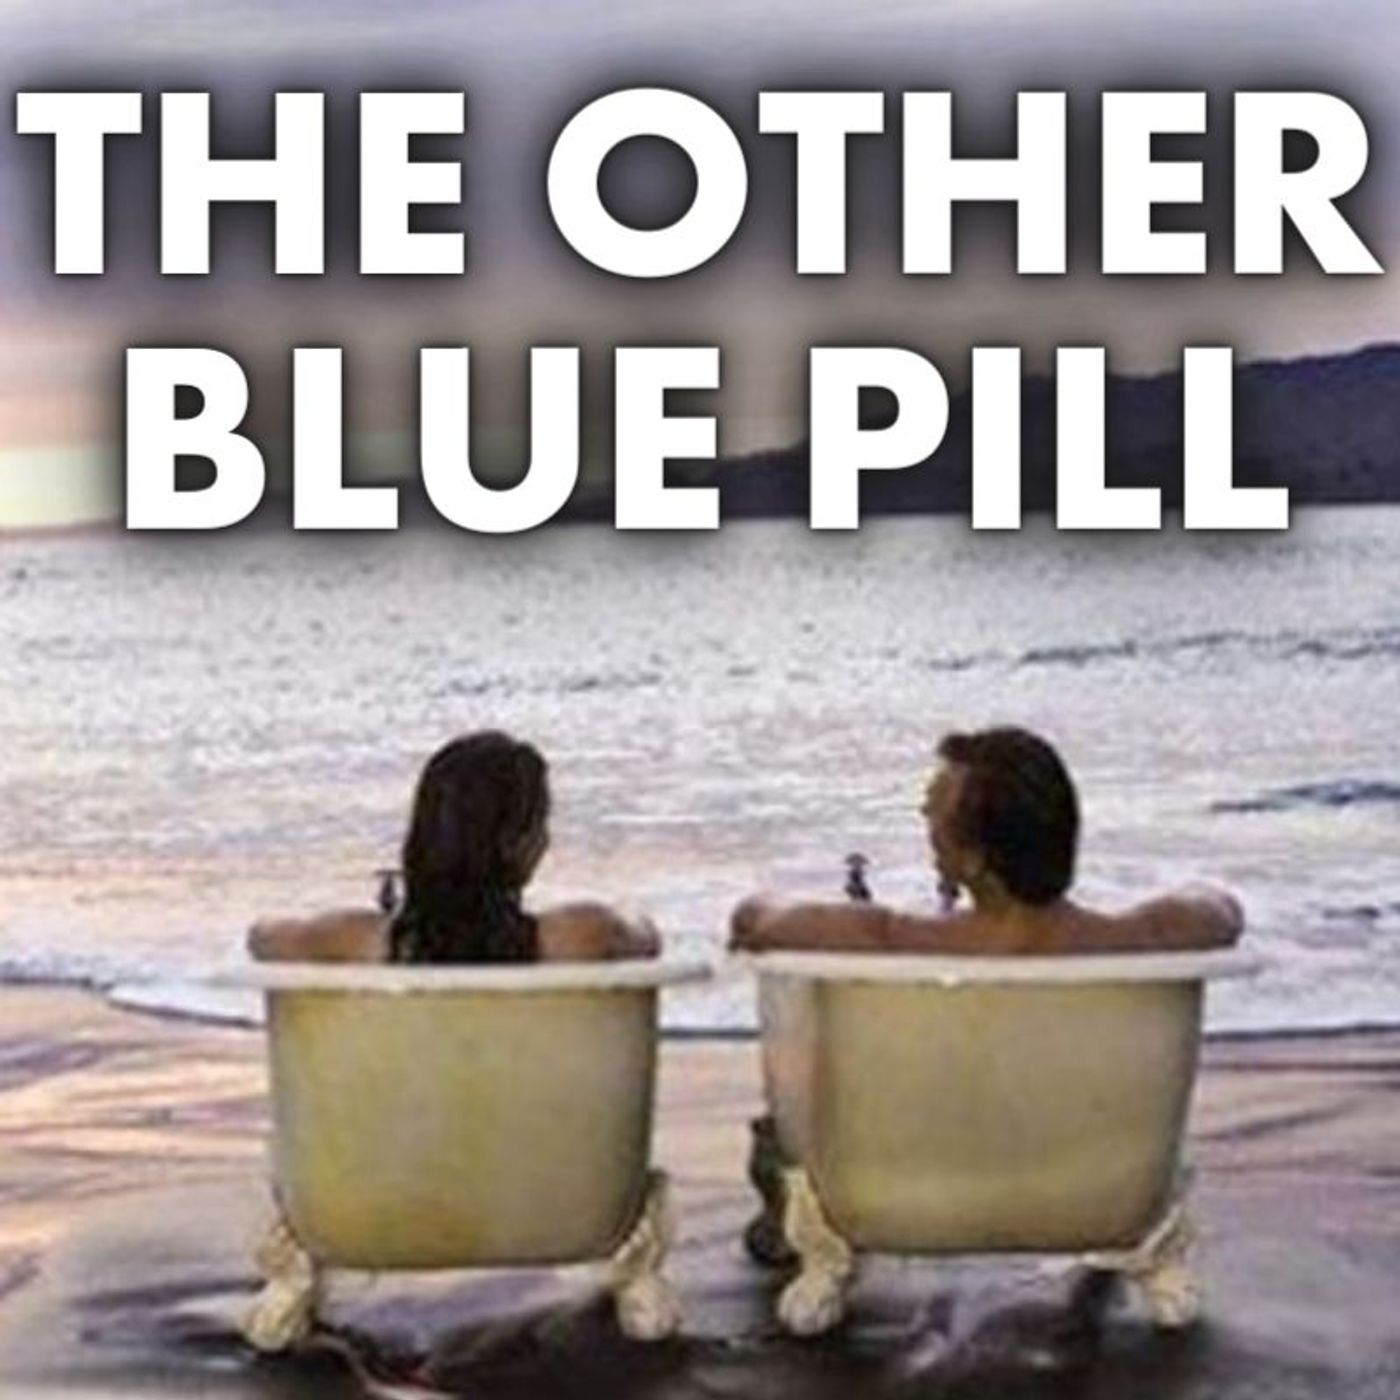 The "Other" Blue Pill 🔵